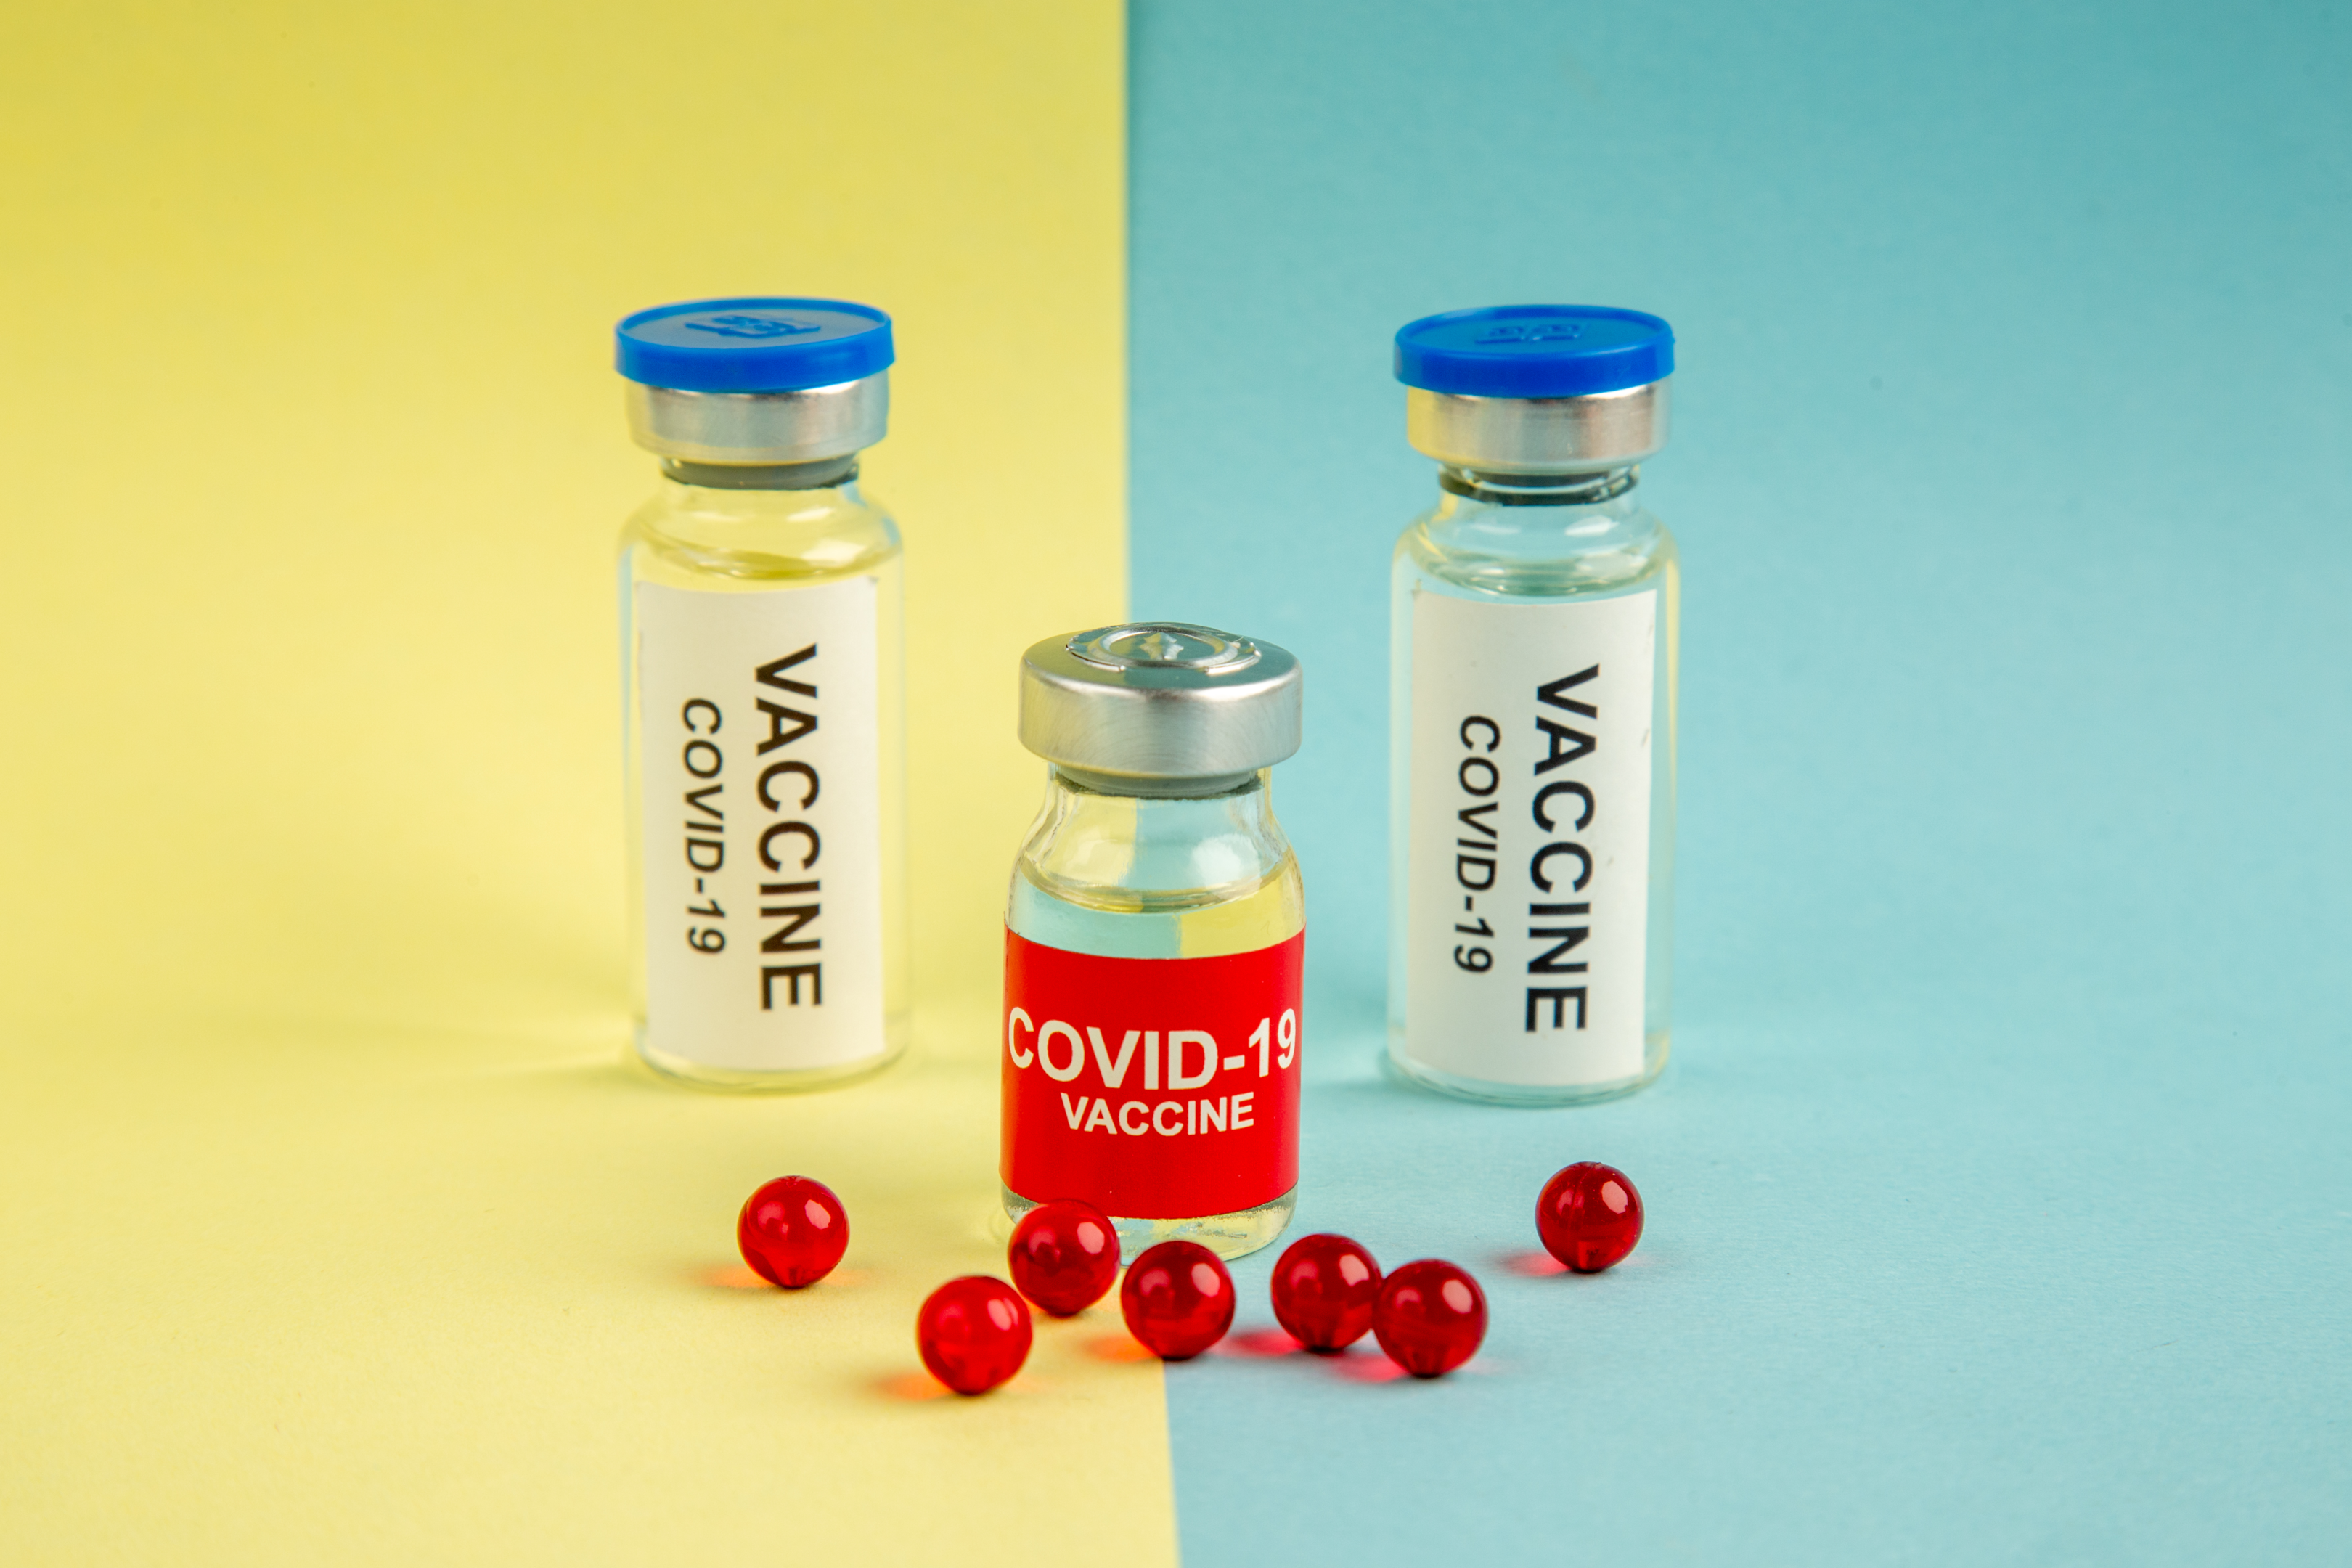 A bivalent vaccine adds more immunogenicity by combining two different virus strains.